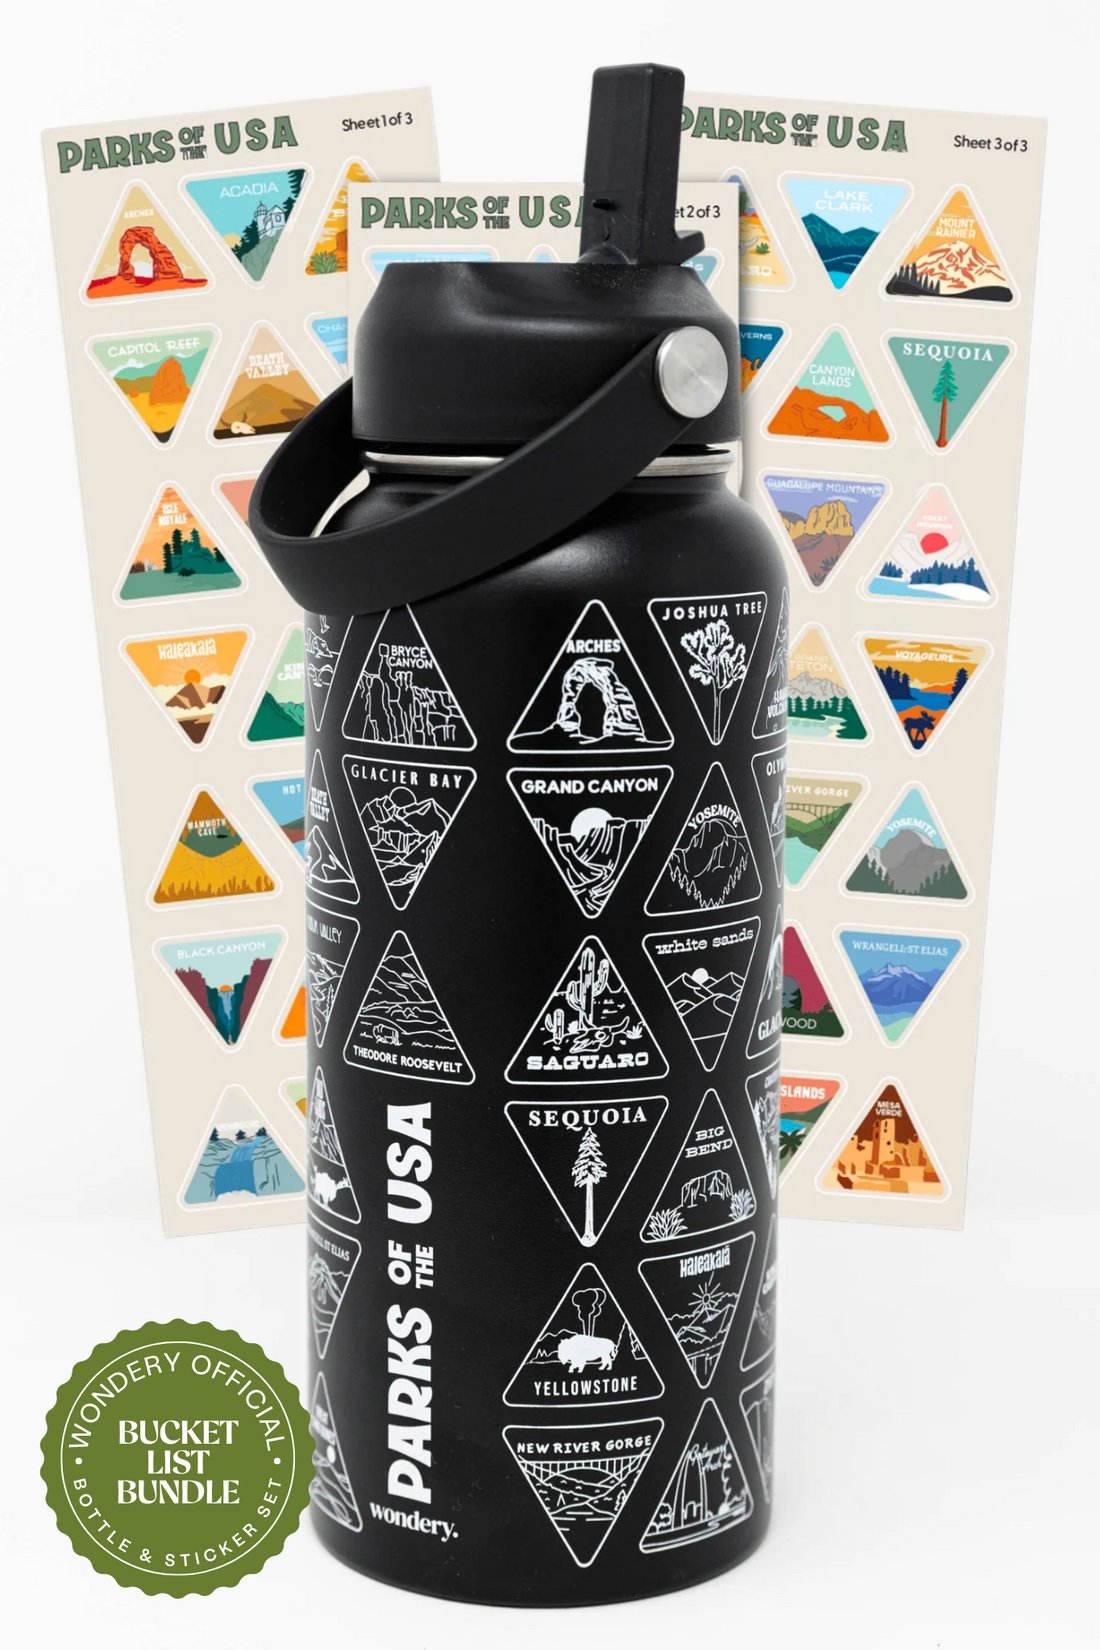 USA National parks lightweight travel water bottle with strap in black